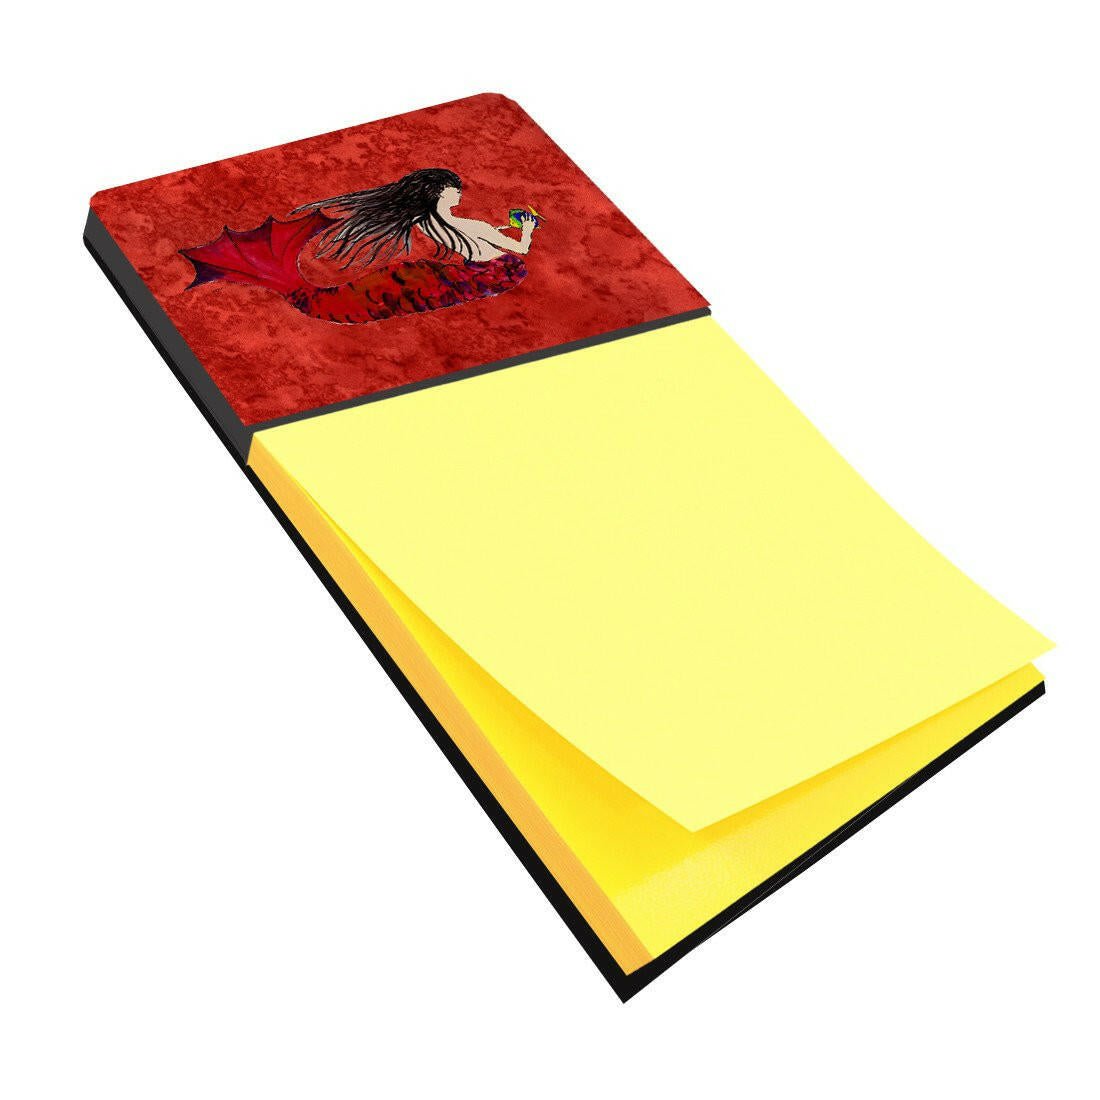 Black Haired Mermaid on Red Sticky Note Holder 8726SN by Caroline's Treasures